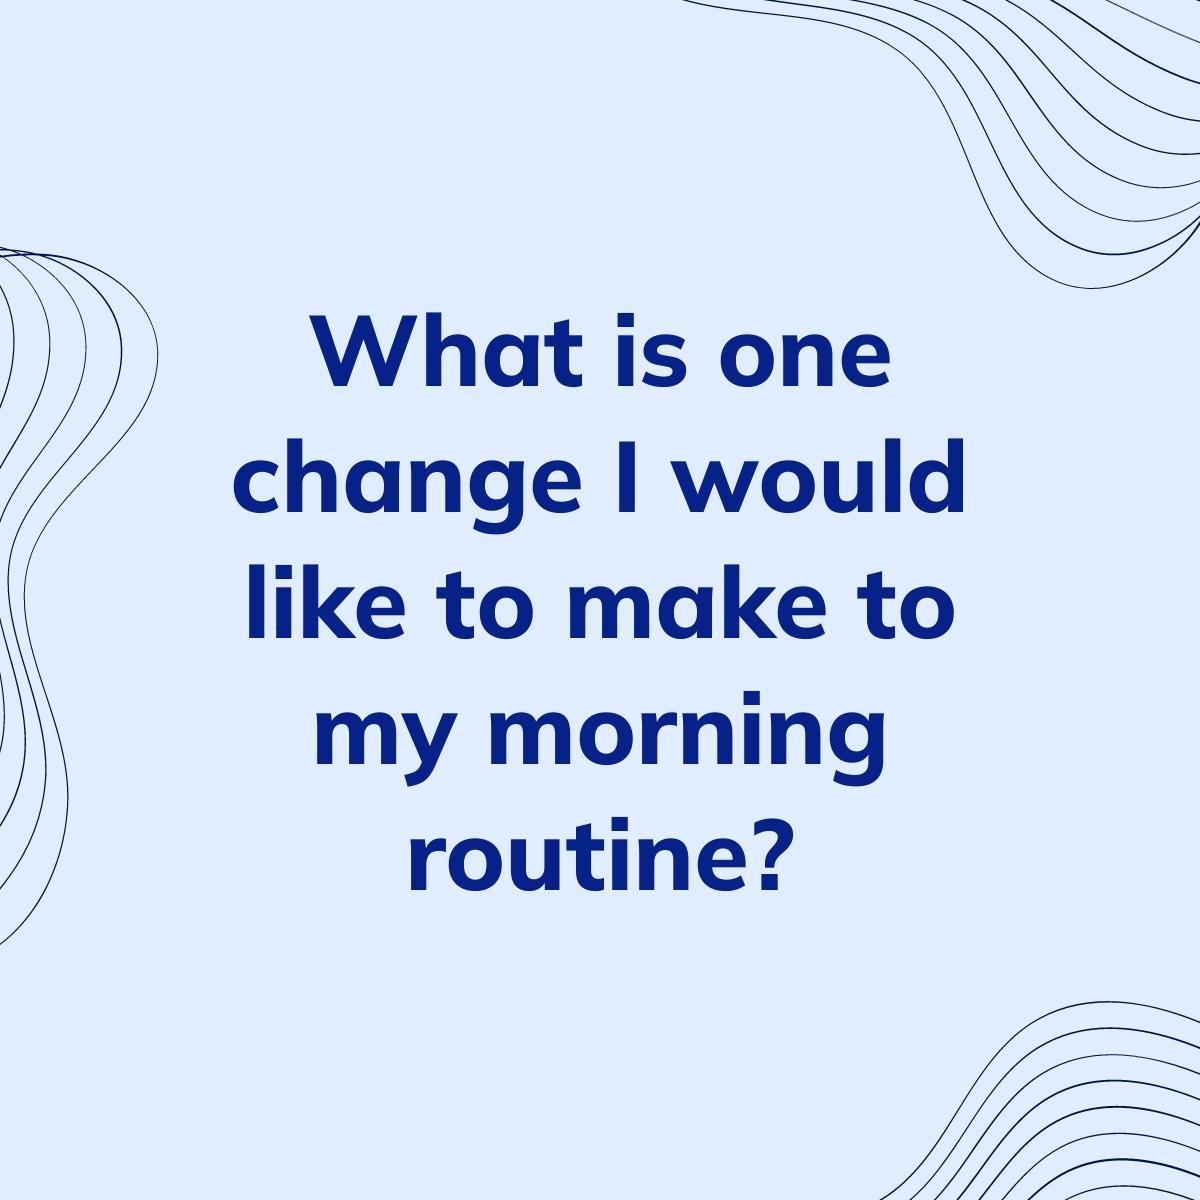 Journal Prompt: What is one change I would like to make to my morning routine?